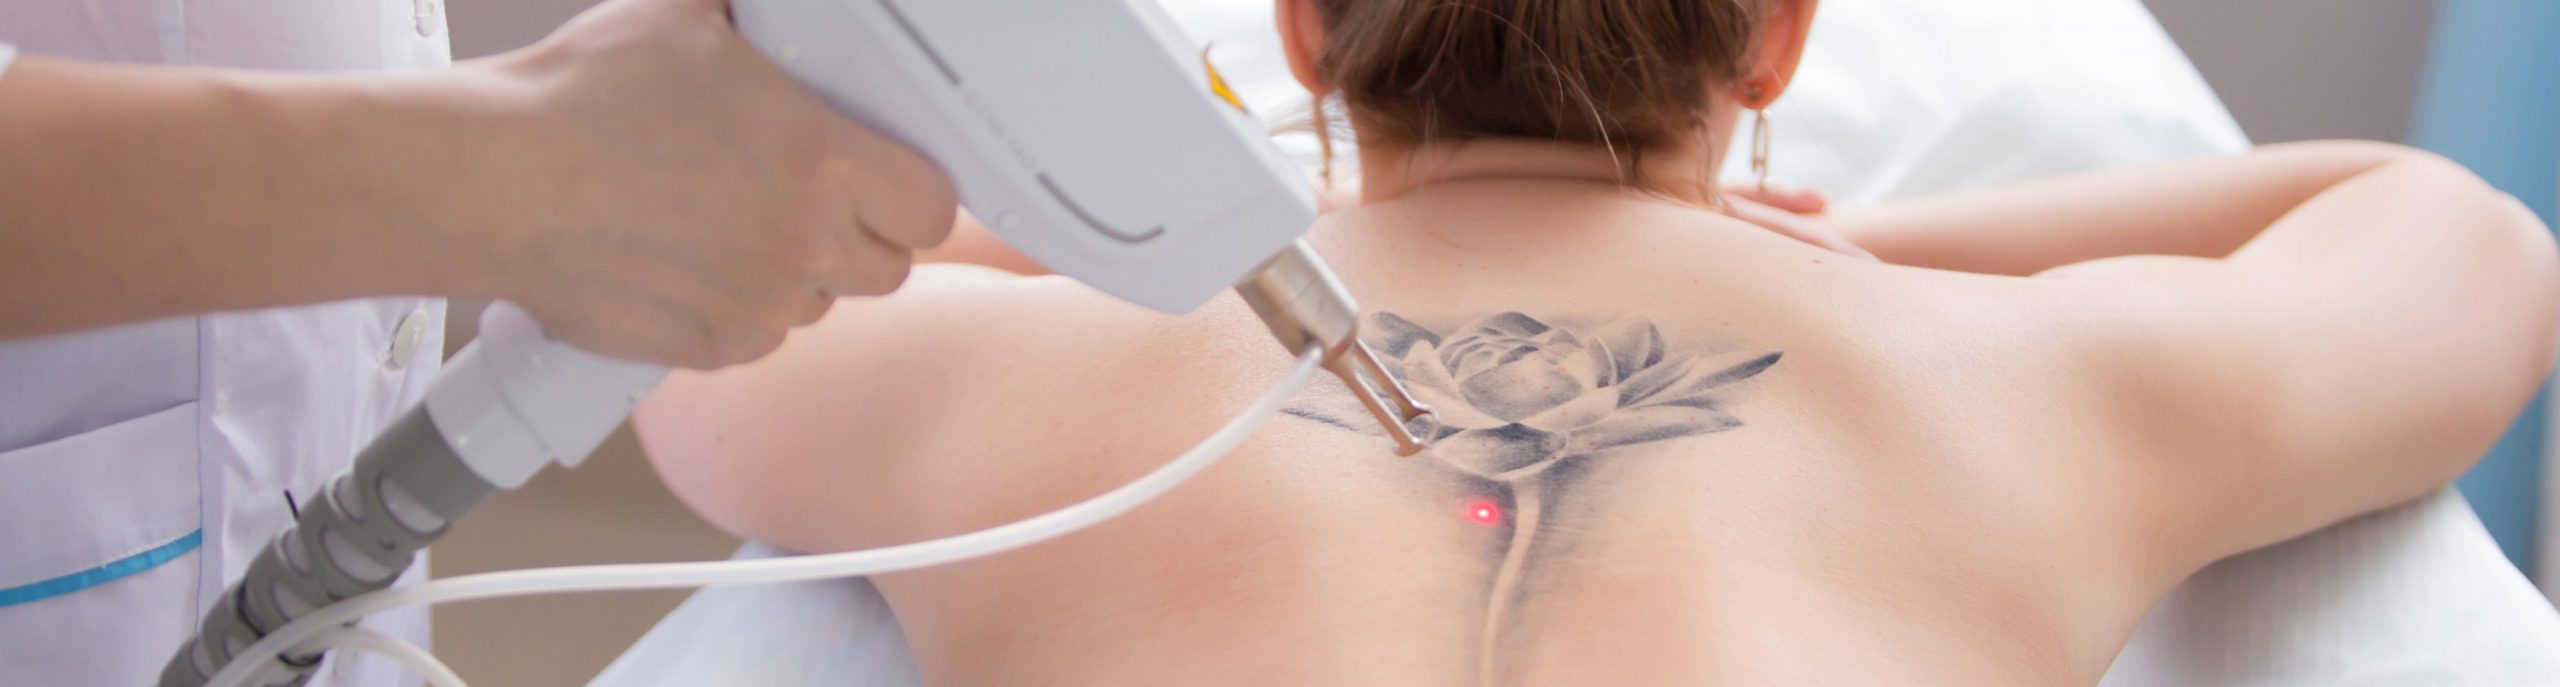 Laser tattoo removal at Essential Aesthetics